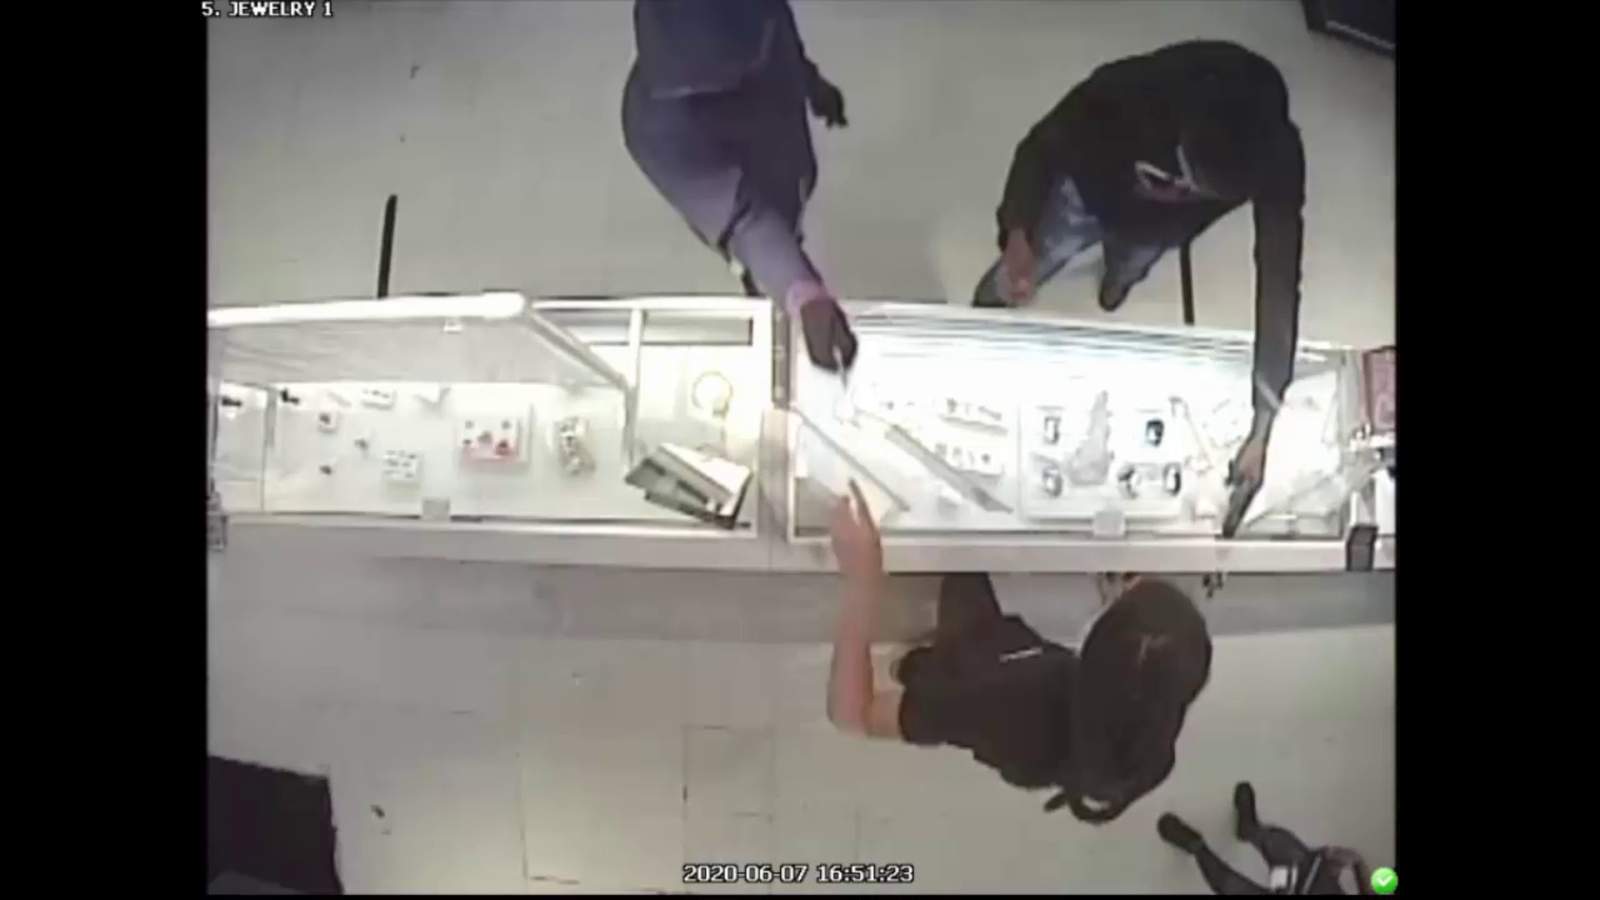 Armed Robbers Hold Up Pawn Shop Employees In Lauderdale Lakes